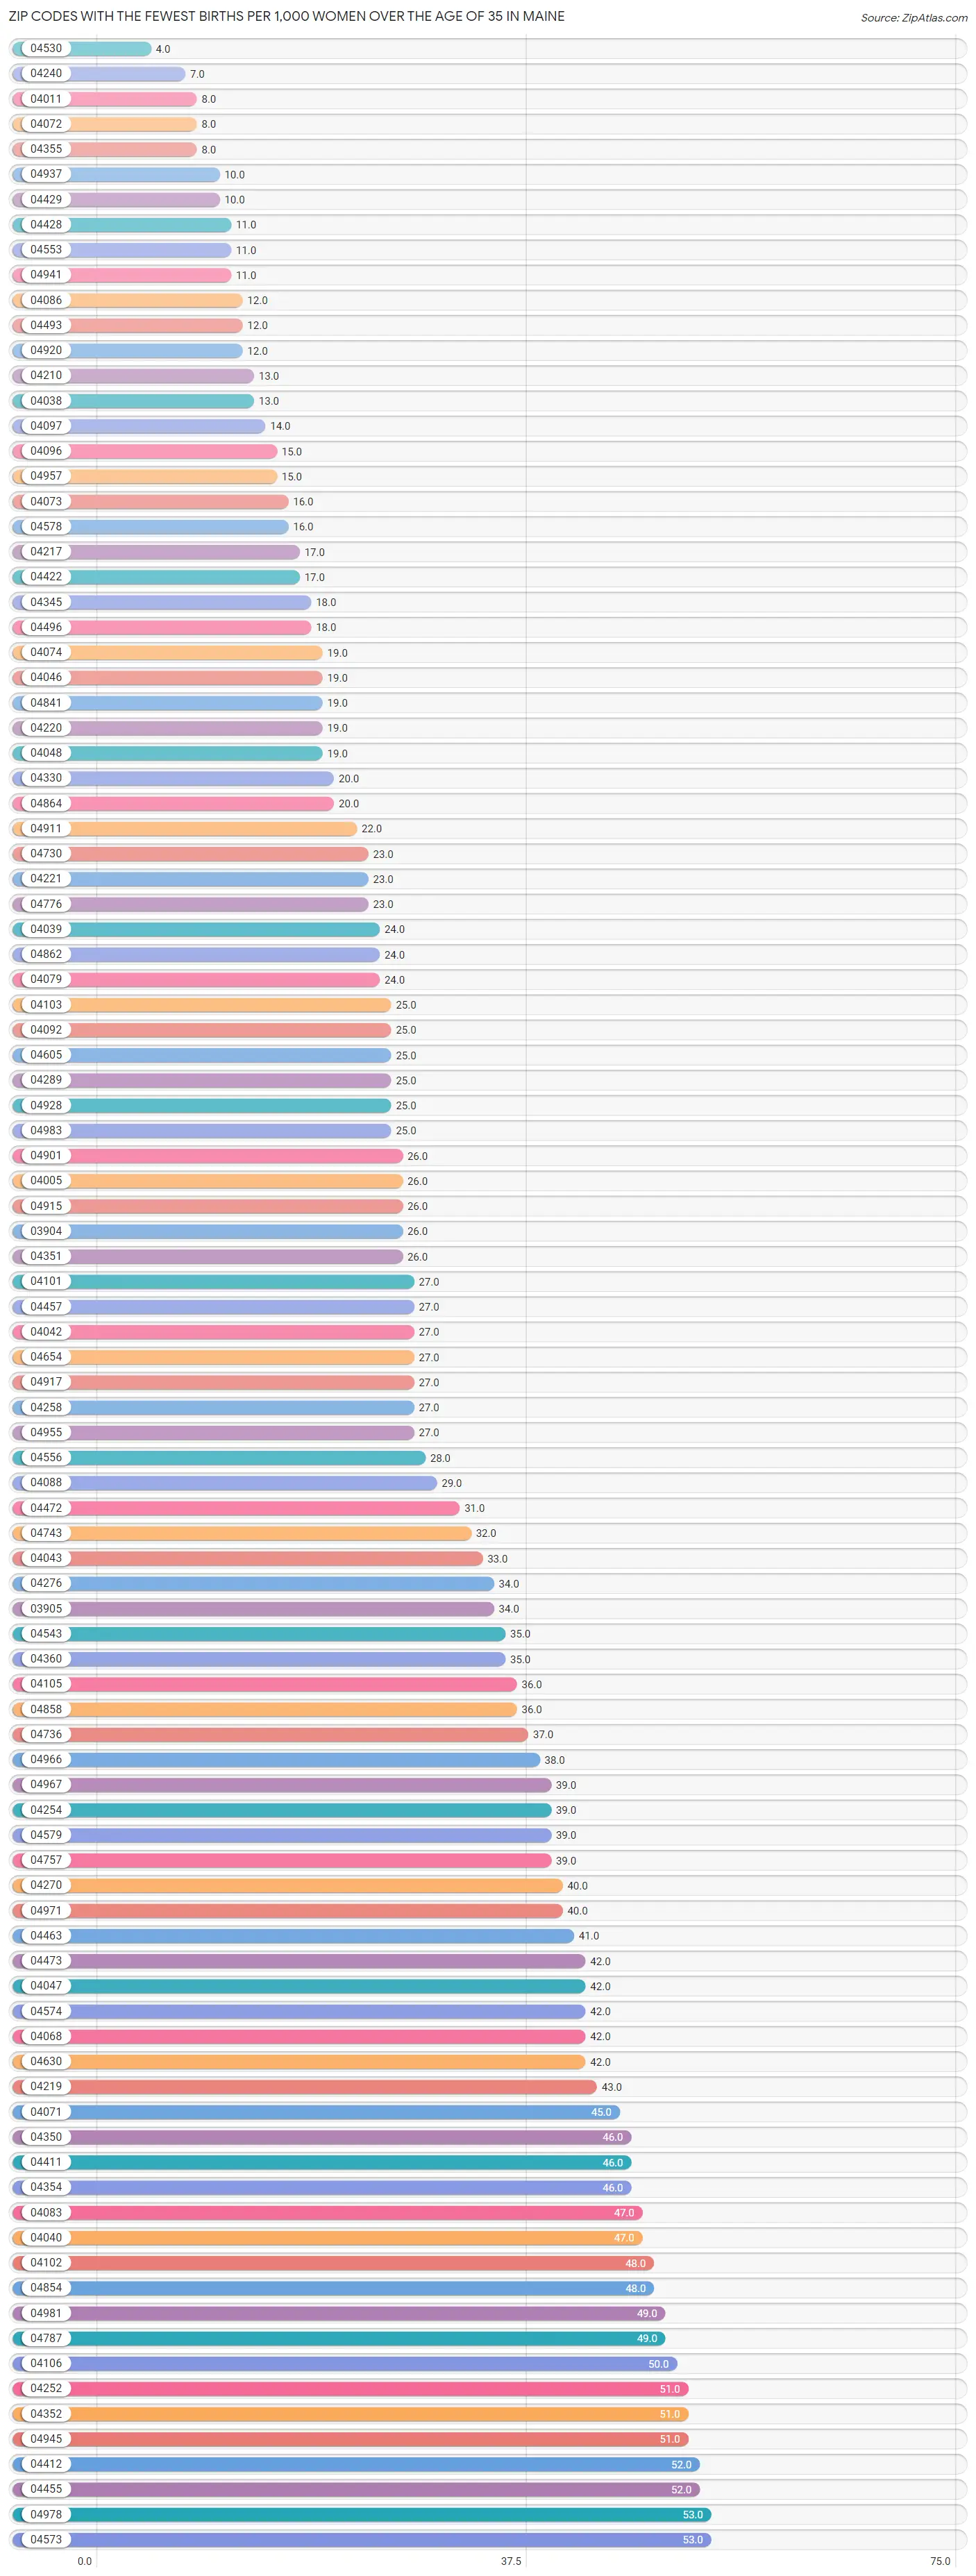 Zip Codes with the Fewest Births per 1,000 Women Over the Age of 35 in Maine Chart